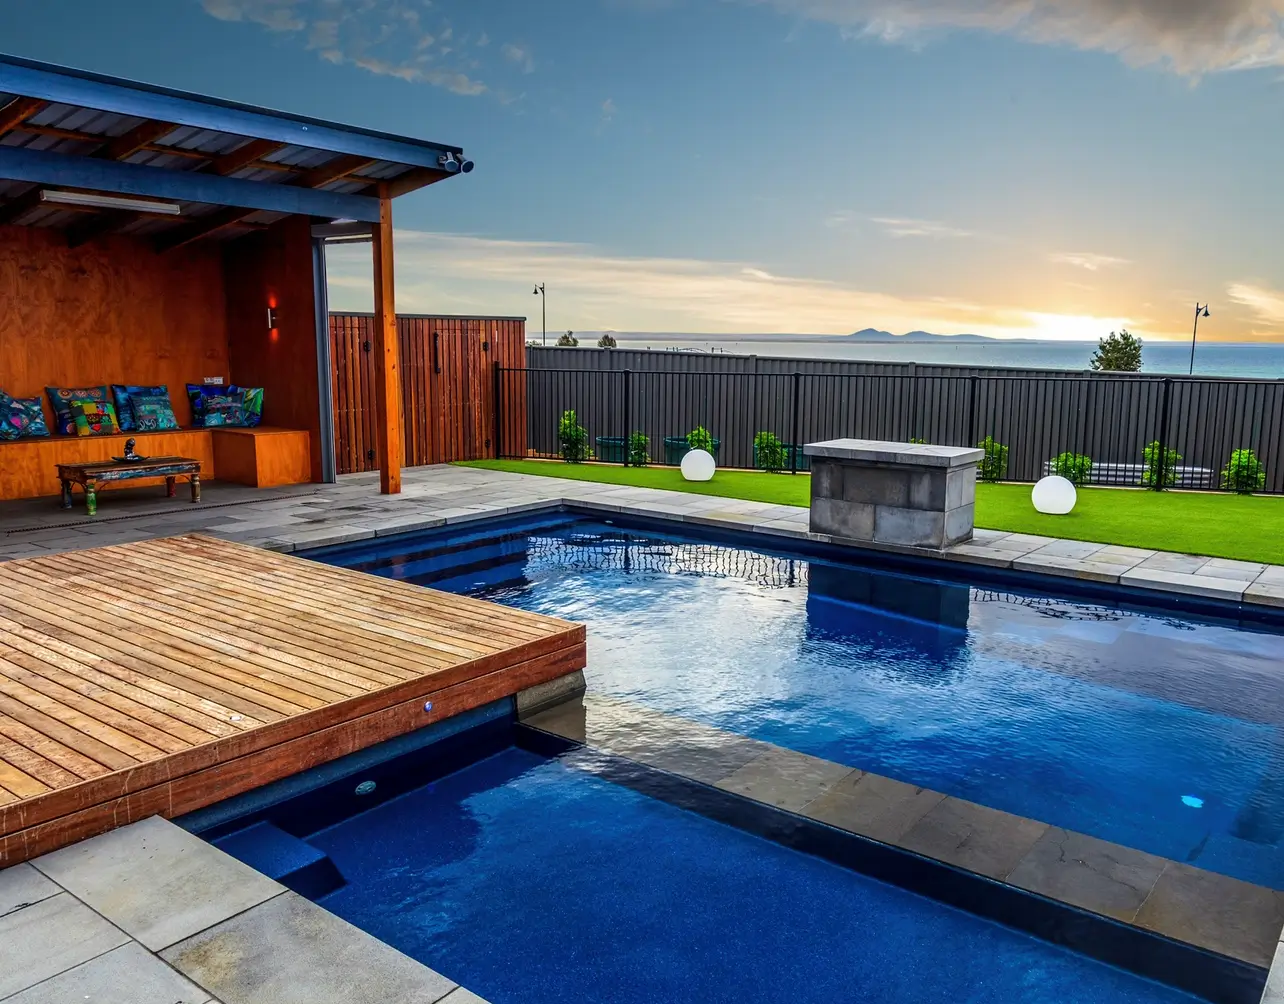 pool spa combo with unique deck and outdoor seating area